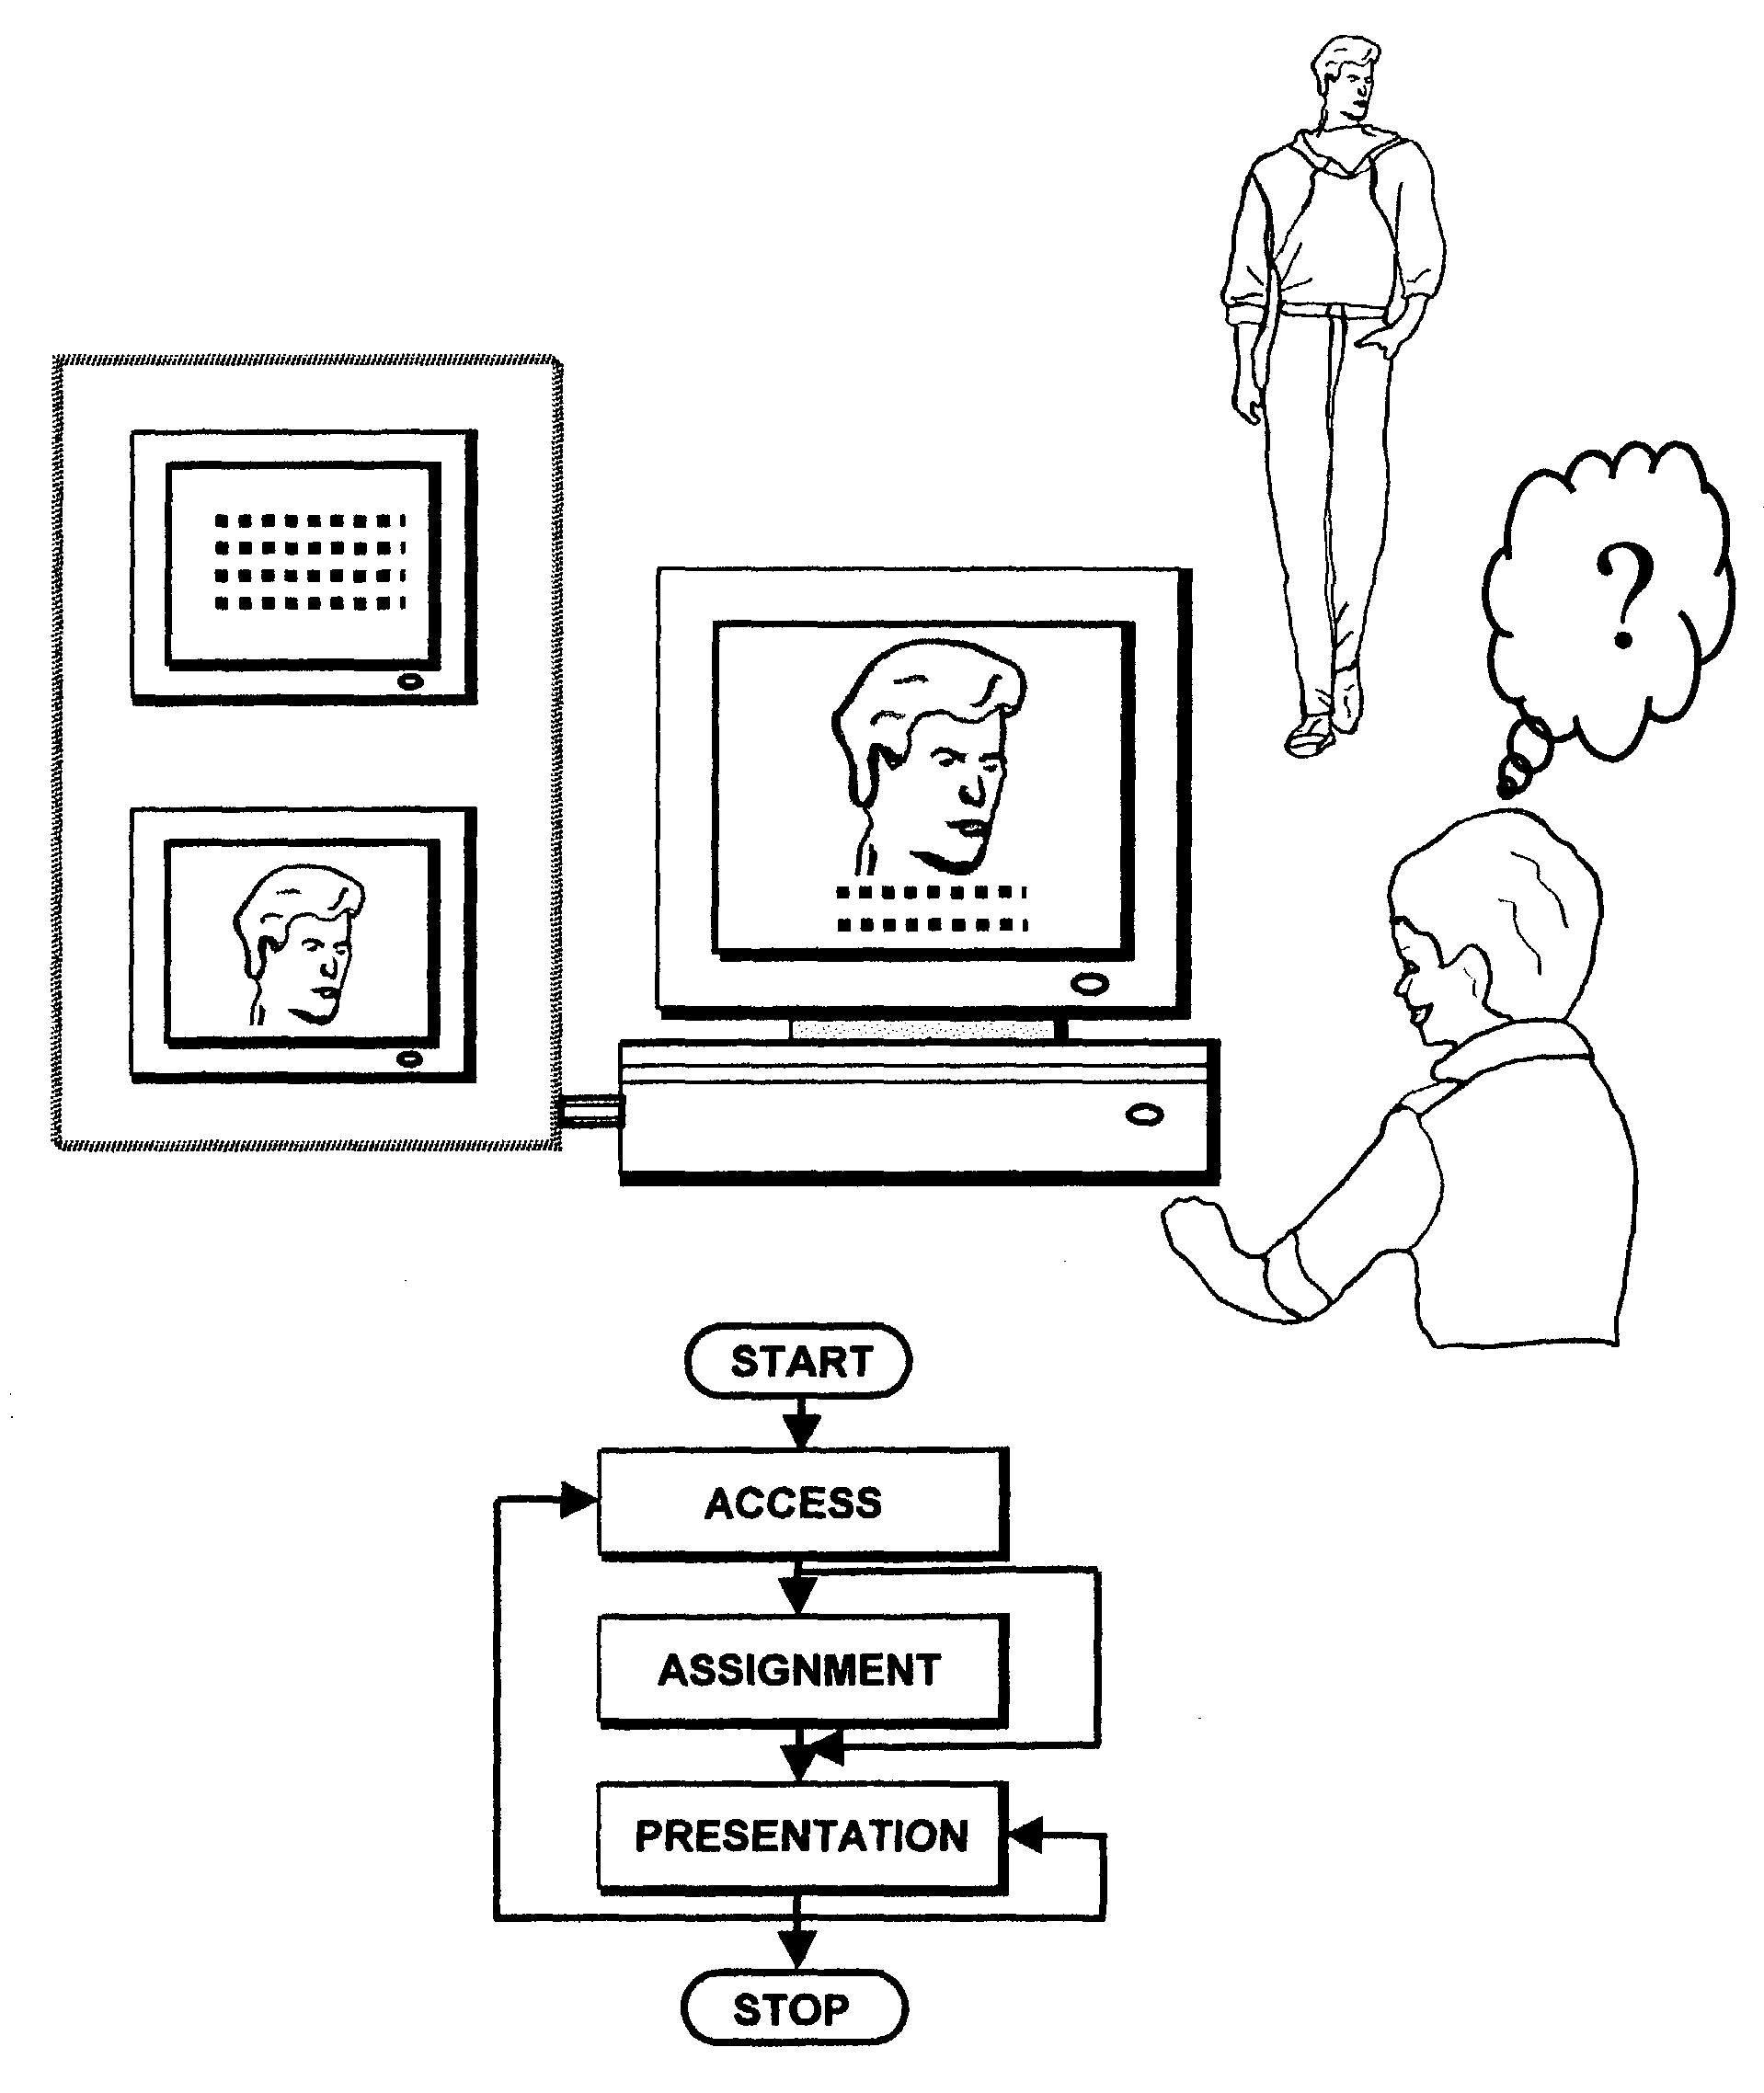 System and methods of interactive training for recall and identification of objects in the real world